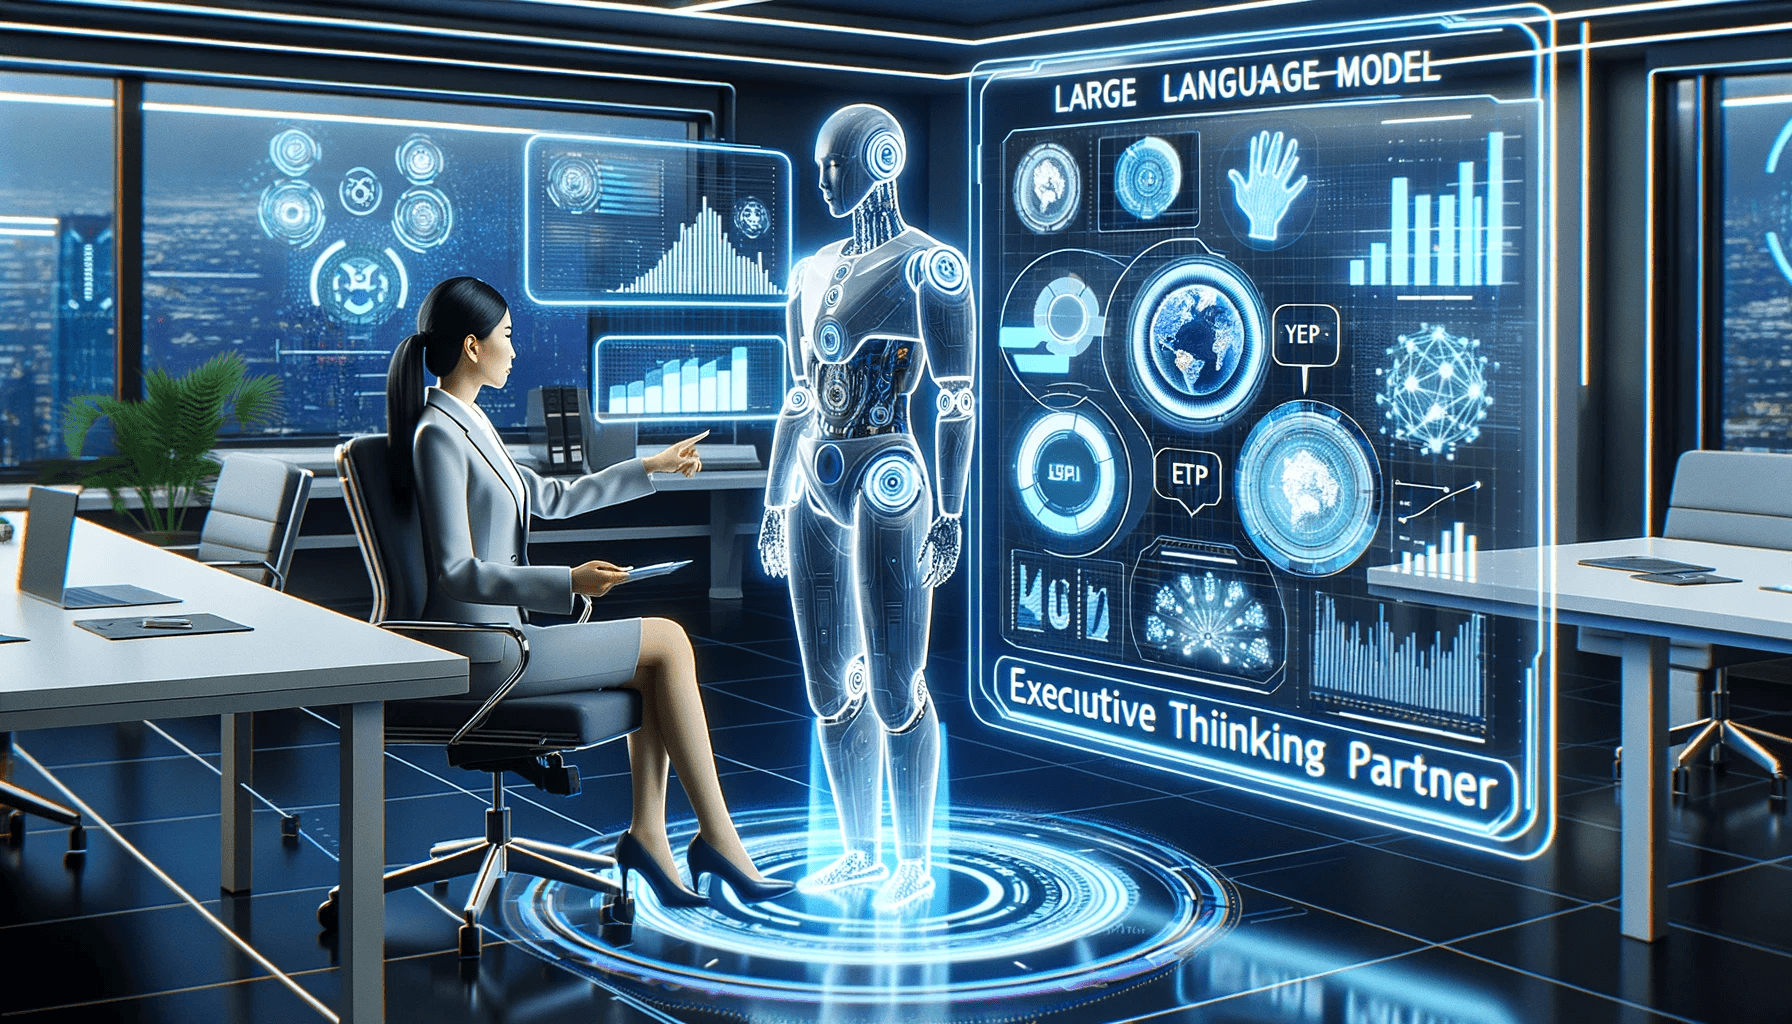 Illustration in 16:9 aspect ratio of a futuristic office setting where a large language model is visualized as a sophisticated holographic AI figure, labeled 'Executive Thinking Partner (ETP)'. The AI figure is shown assisting a business executive, a woma